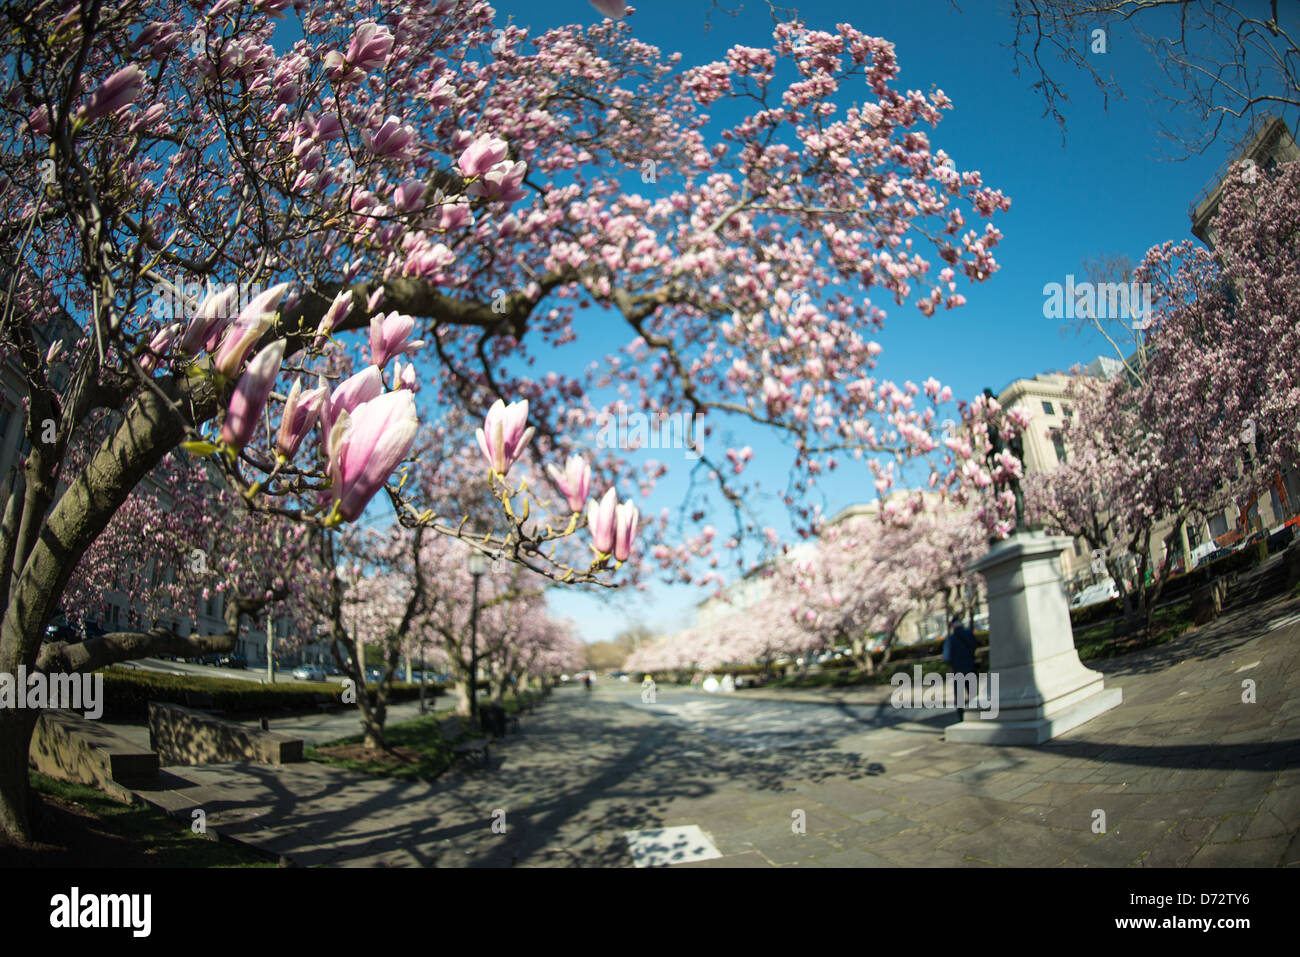 WASHINGTON DC, USA - Tulip Magnolias in spring bloom in Rawlins Park in the Foggy Bottom neighborhood of northwest Washington DC. The statue from which the park gets its name is of Major General John A. Rawlins, advisor to Ulysses S. Grant. Stock Photo